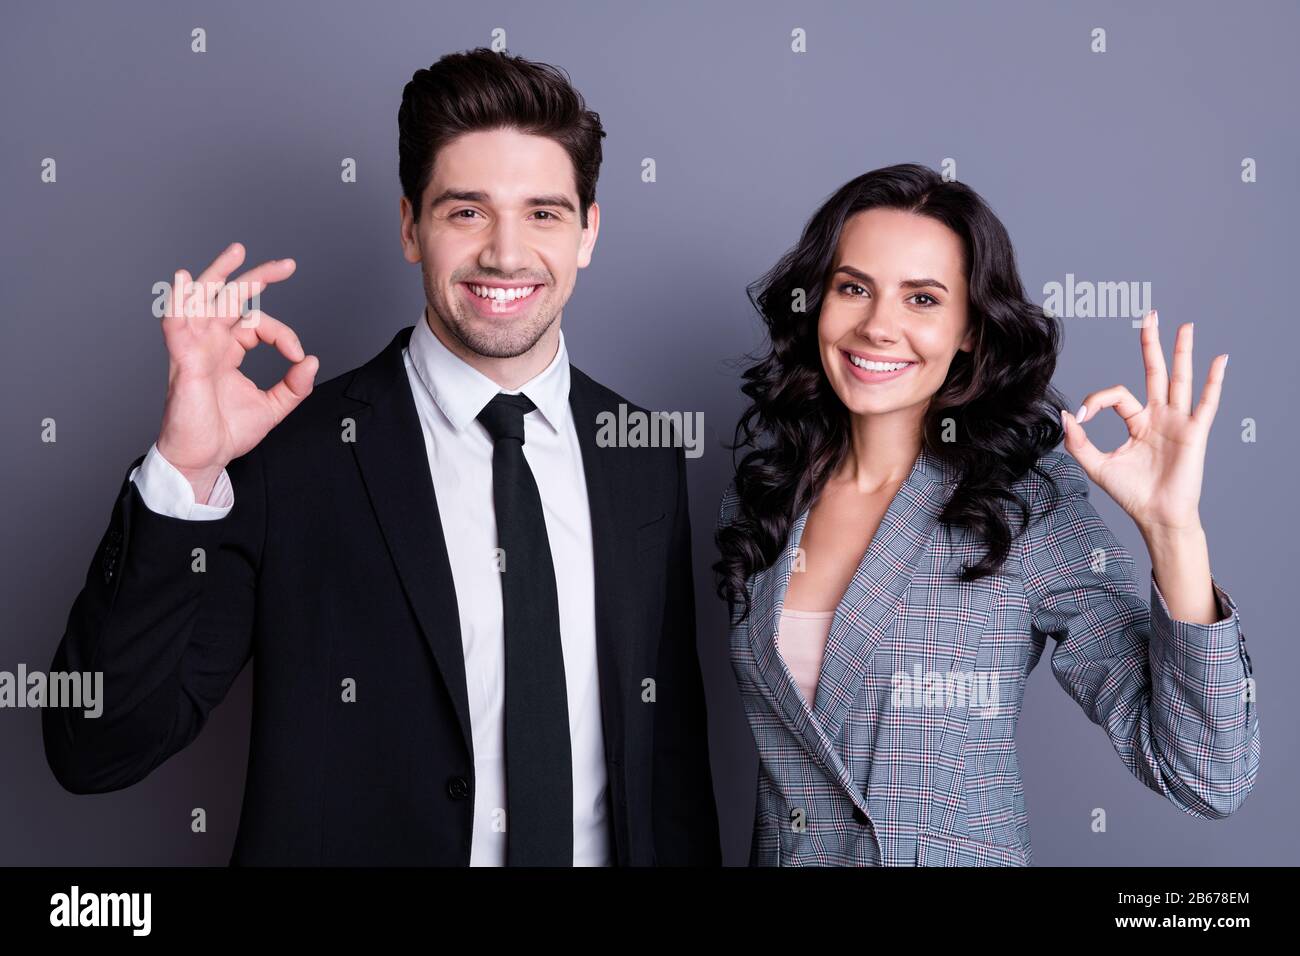 Portrait of beautiful two bussinesspeople showing ok sign wearing stylish black jacket blazer tie isolated over gray background Stock Photo